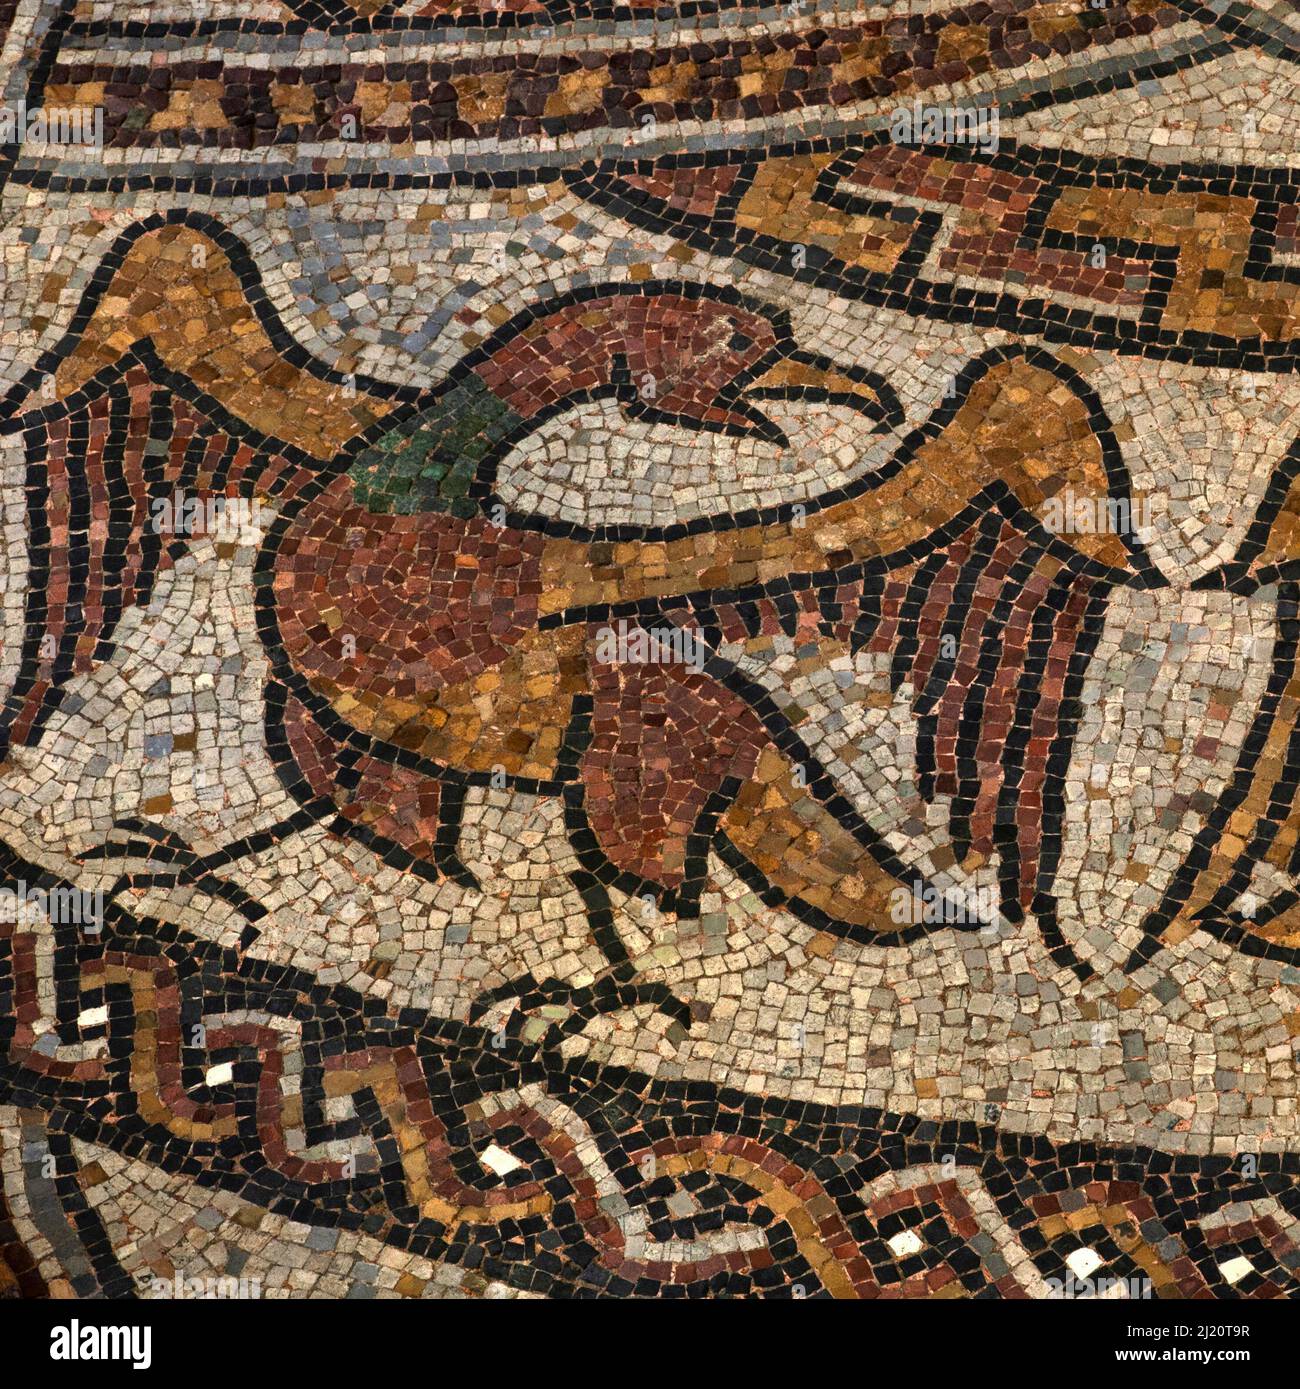 Eagle with open beak and outstretched wings.  Detail of medieval mosaic in restored late-1000s or early 1100s pavement in former Benedictine abbey church at Sorde l'Abbaye, Landes, Nouvelle-Aquitaine, France. Stock Photo